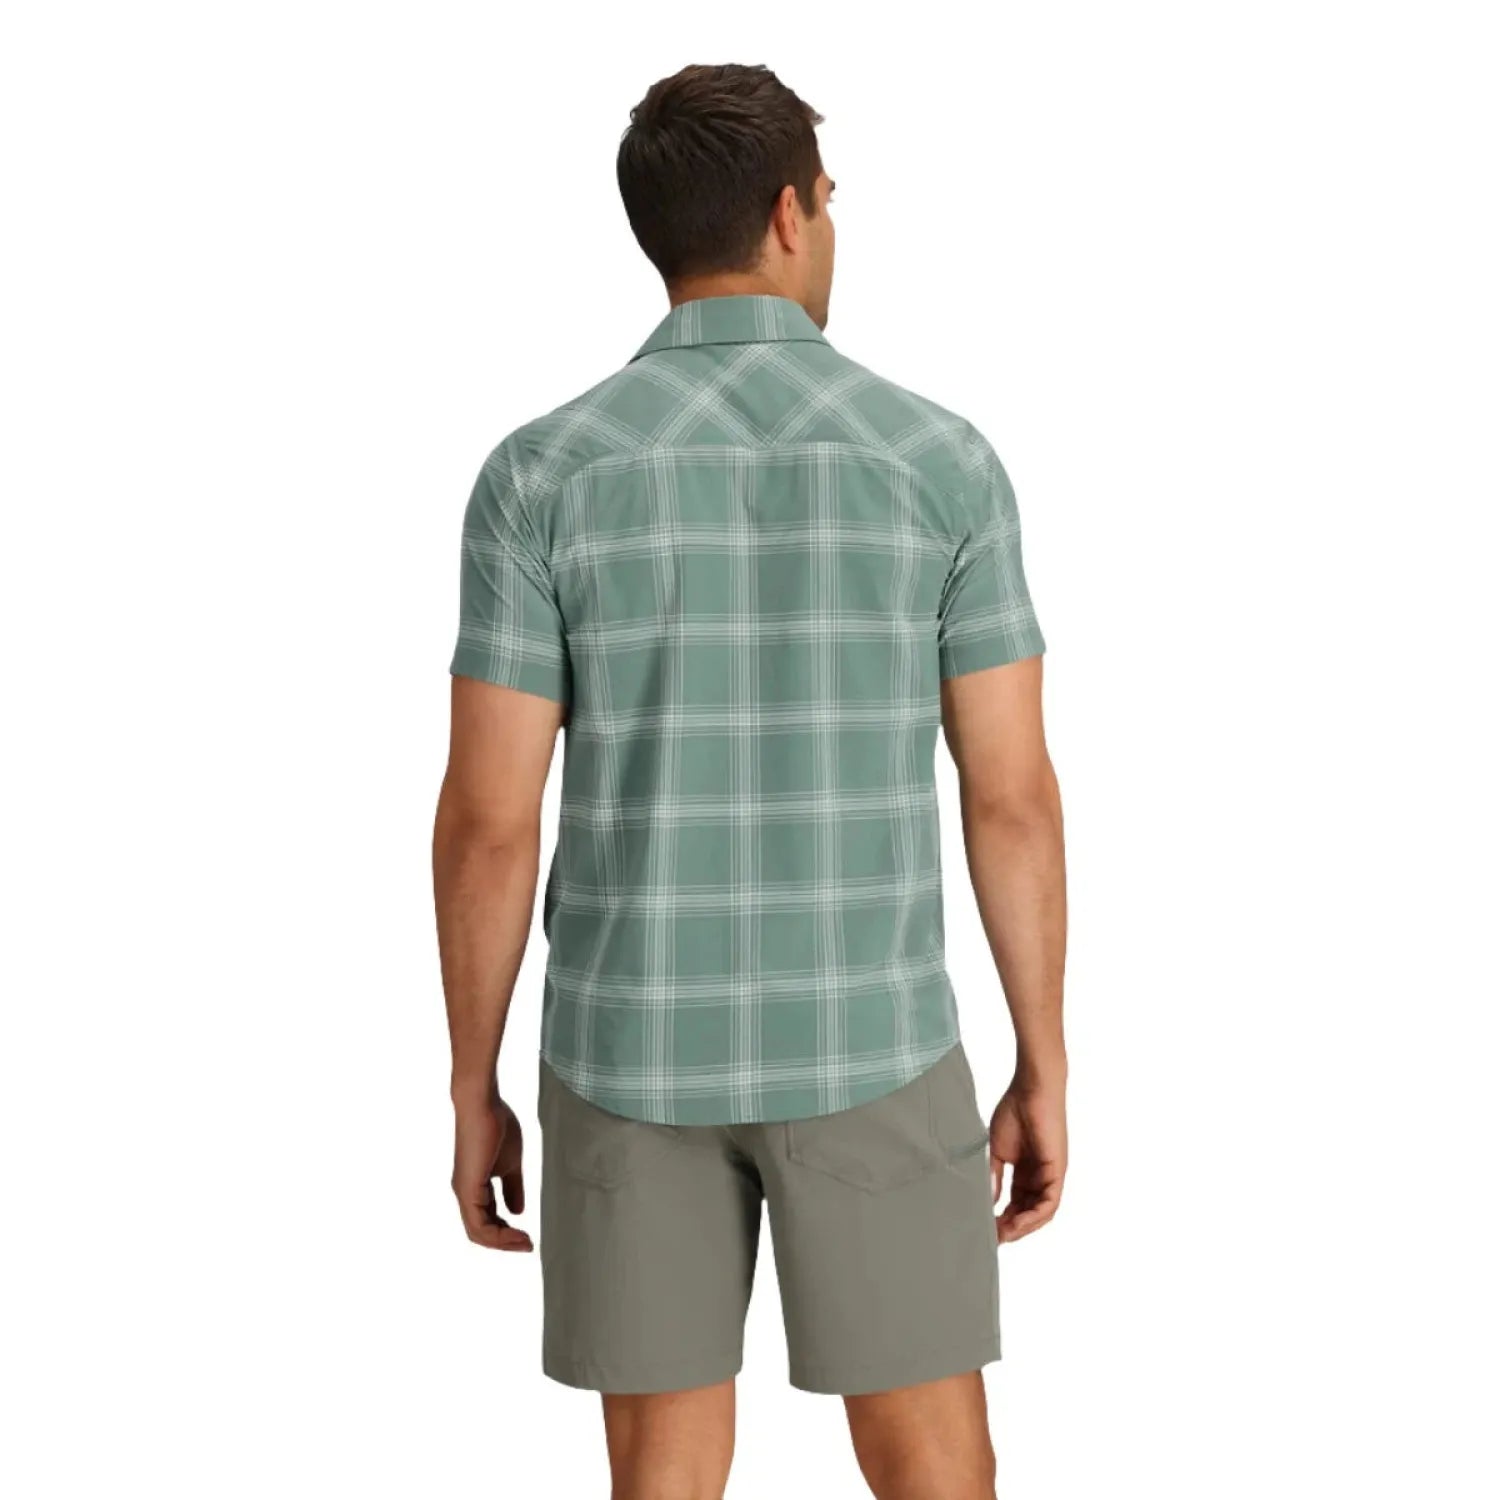 Outdoor Research Men's Astroman Short Sleeve Sun Shirt shown in the Balsam Plaid color option. Back view